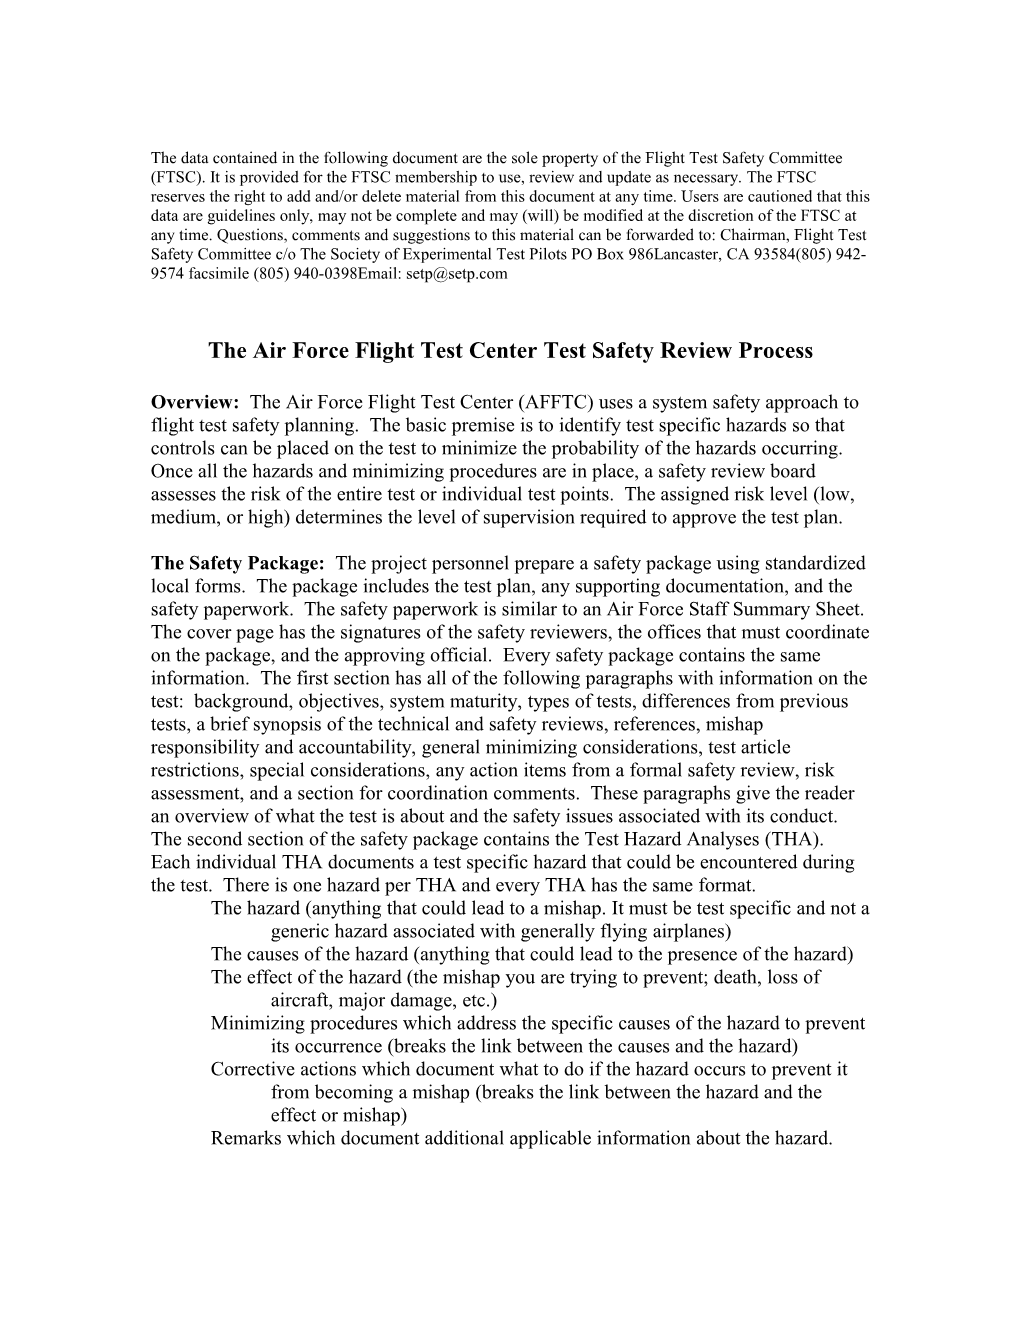 The Air Force Flight Test Center Test Safety Review Process